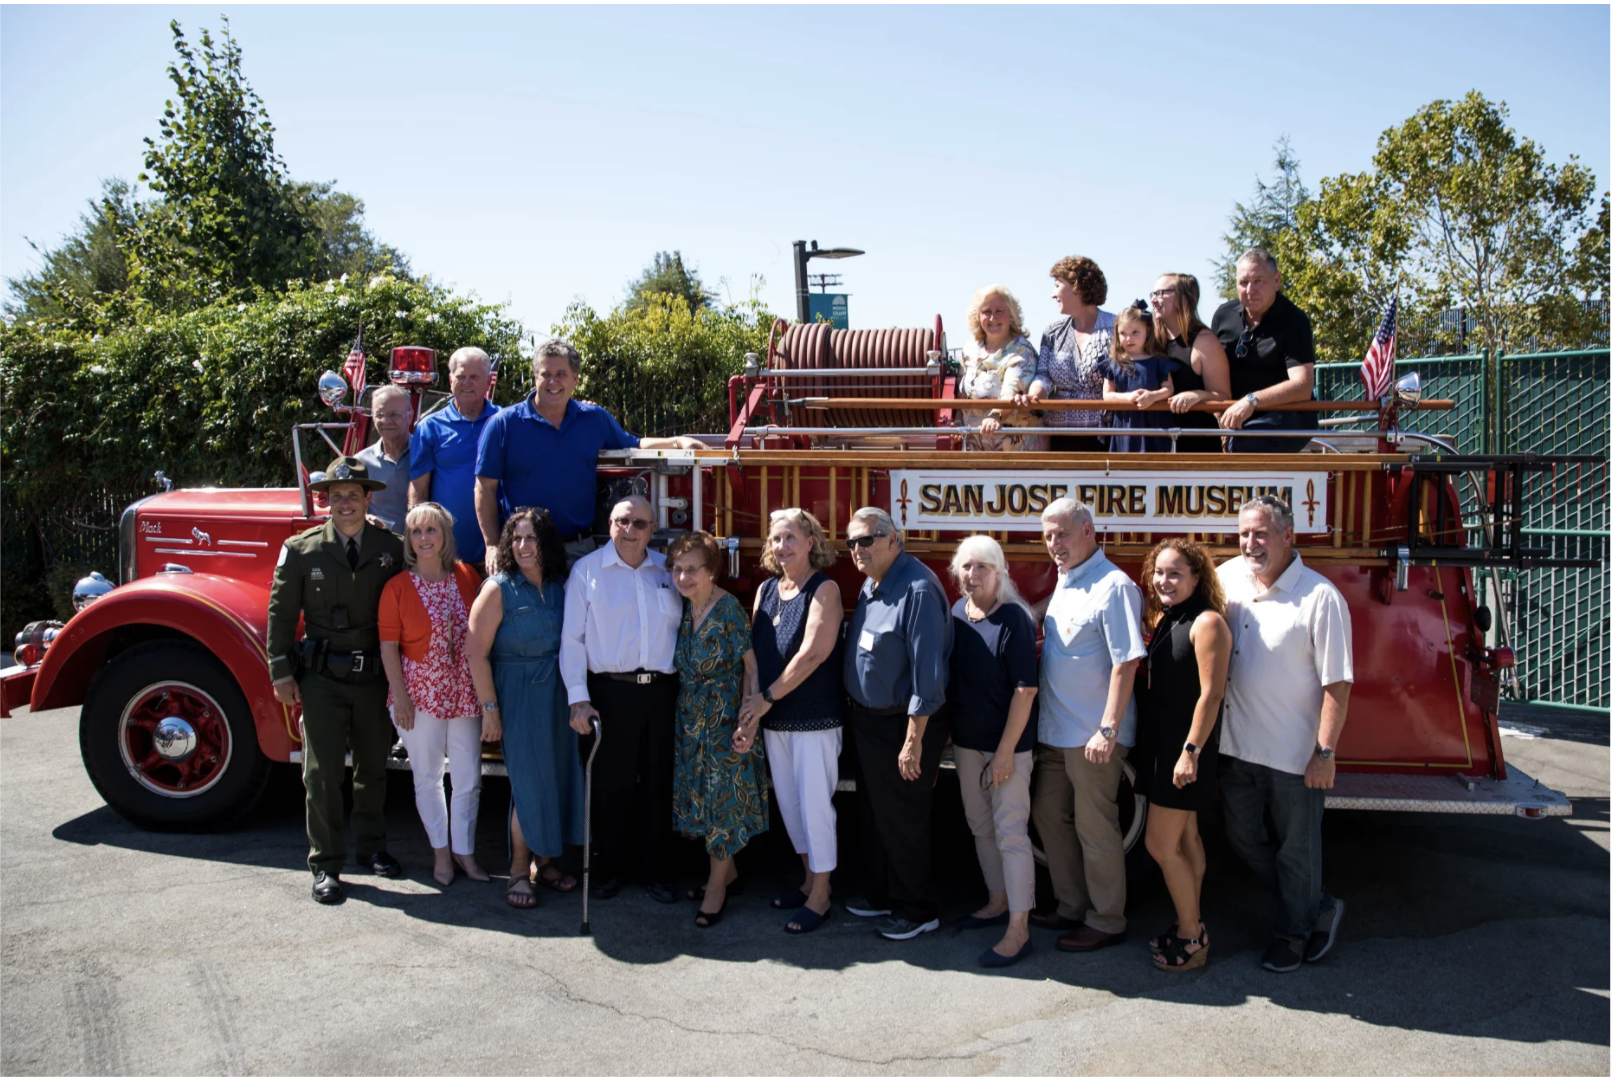 Mission College has dedicated its three-story fire-training tower in honor of the Von Raesfeld family, a perfect choice given the family’s history in both Santa Clara and the Bay Area firefighting scene.